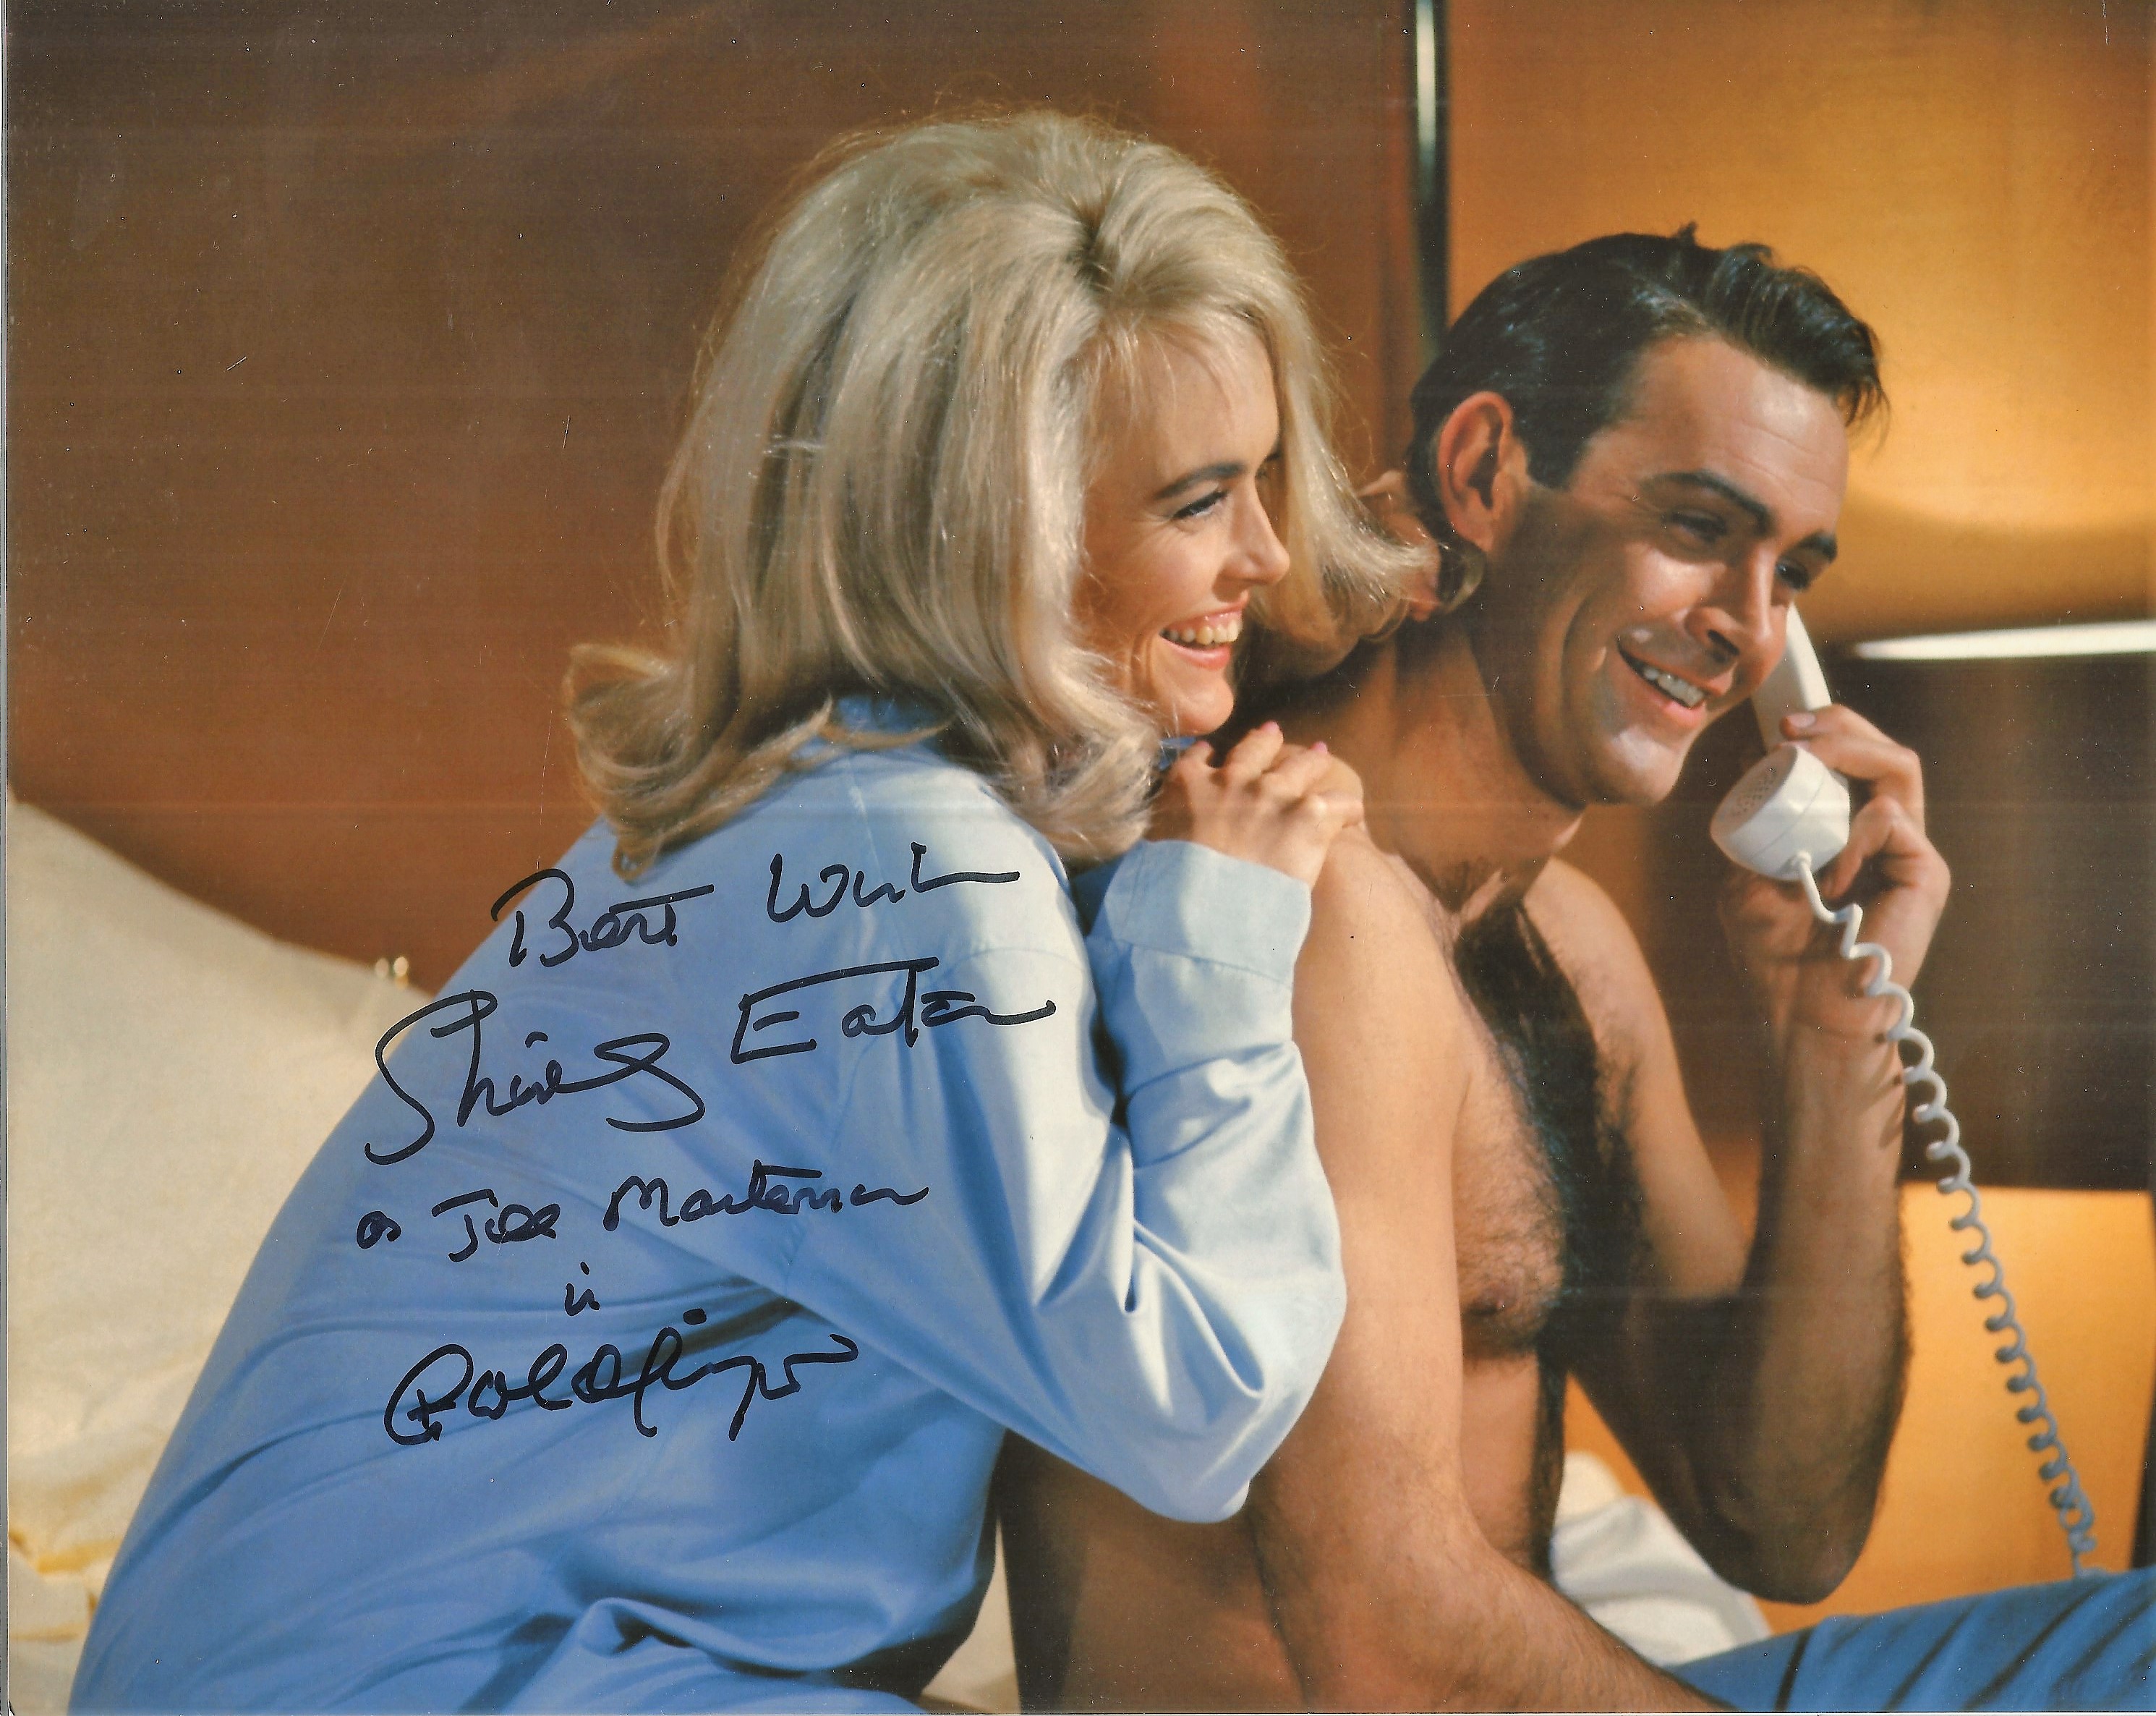 James Bond. Shirley Eaton Handsigned 10x8 Colour Photo, with inscription Best Wishes, Shirley